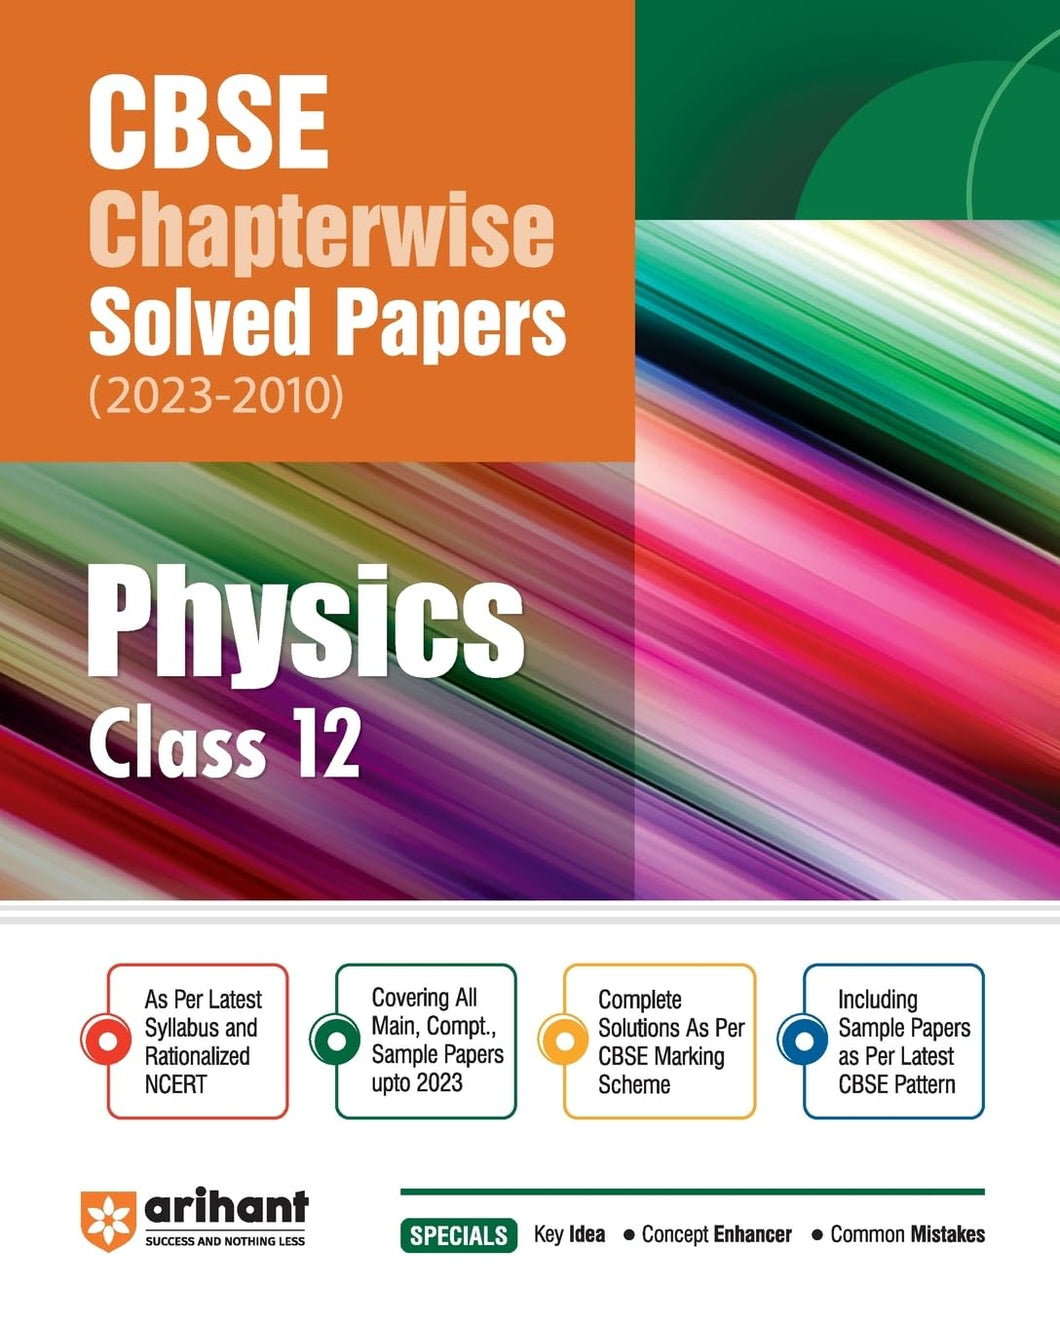 CBSE Physics Chapterwise Solved Papers Class 12 2020-2010